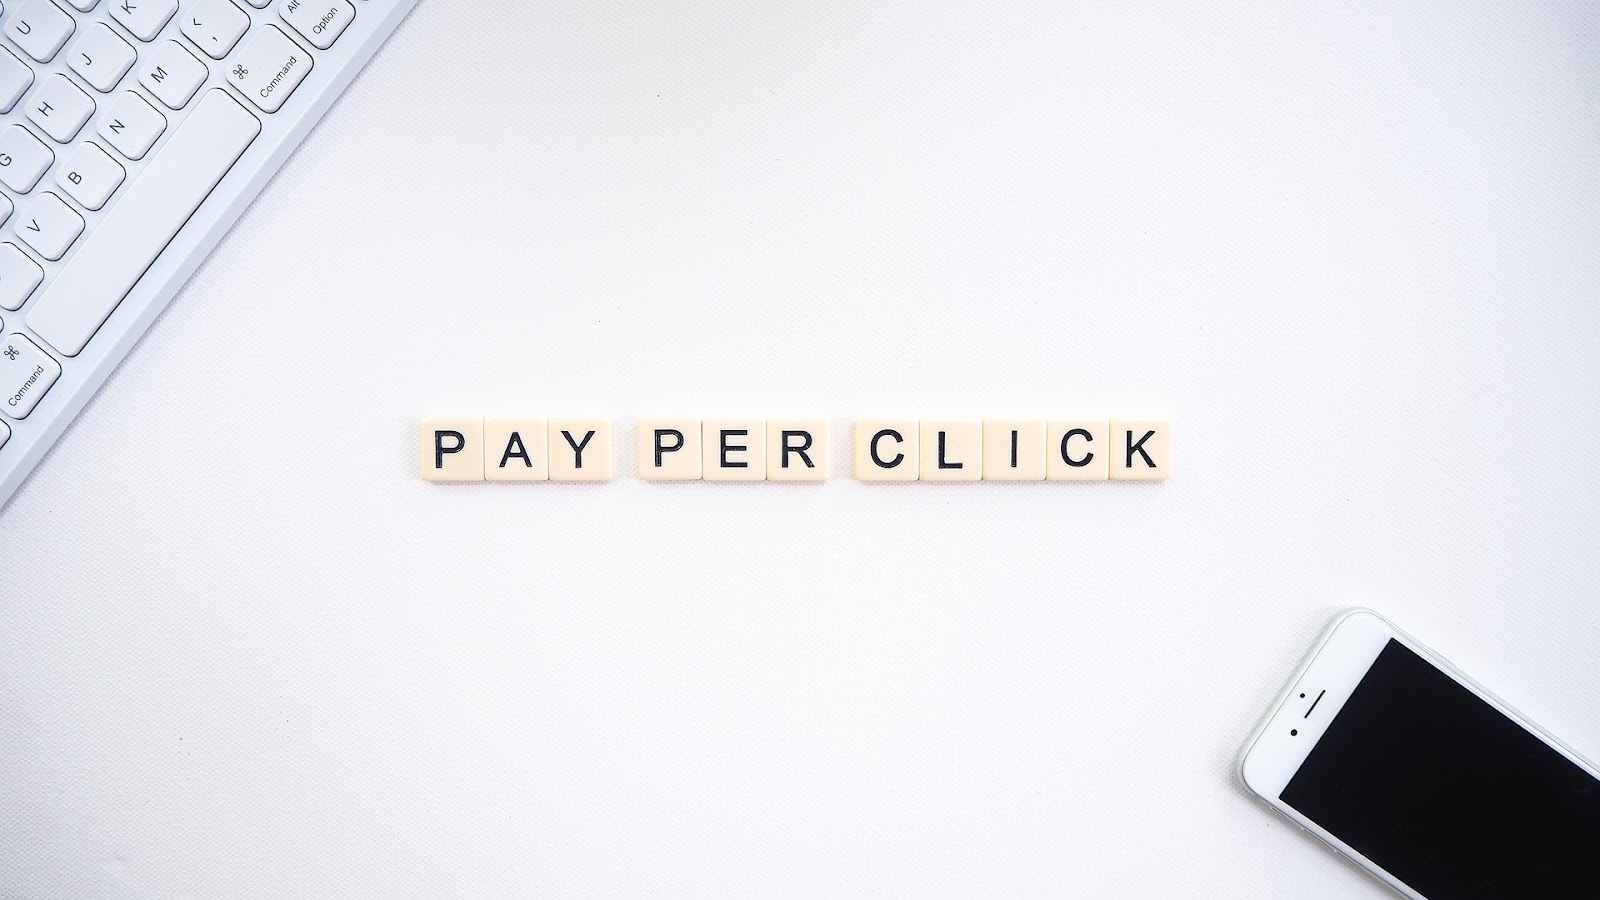 Pay Per Click with scrabble letters